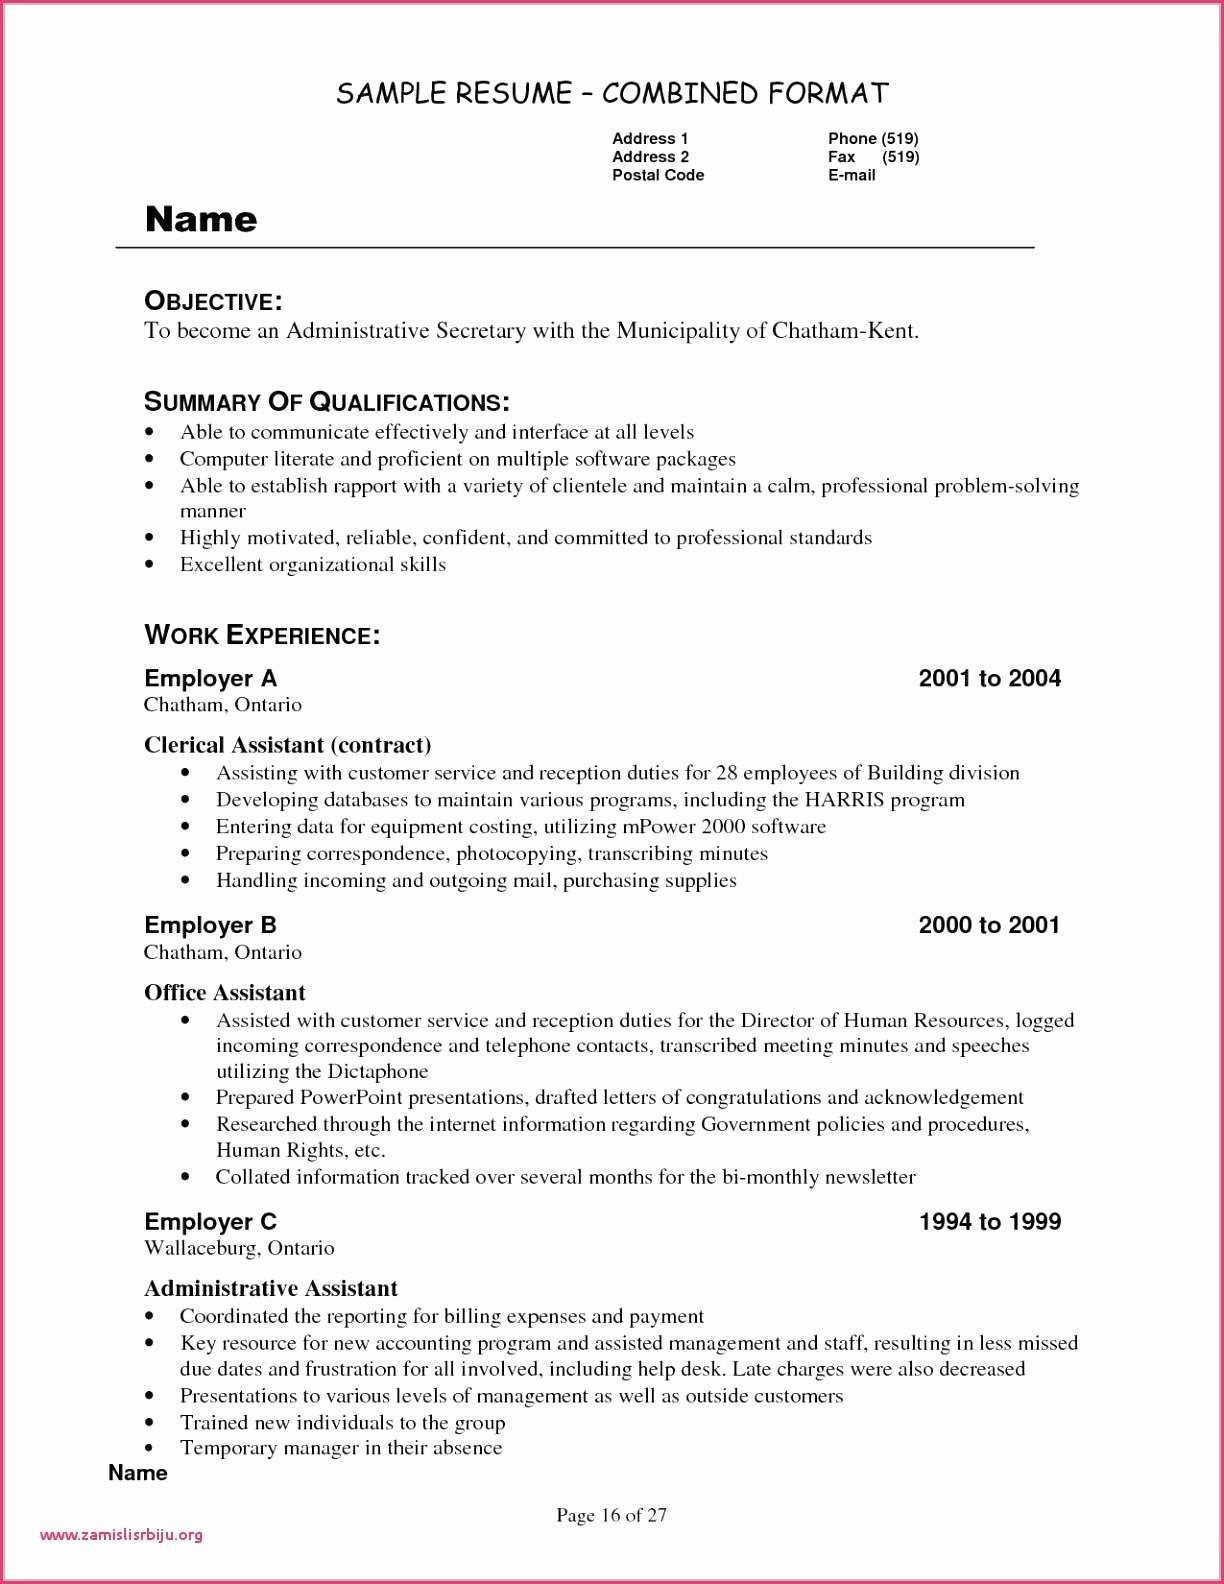 Sample Minutes Of the Meeting Luxury 46 Example Any Minutes A Meeting Free Resume Template